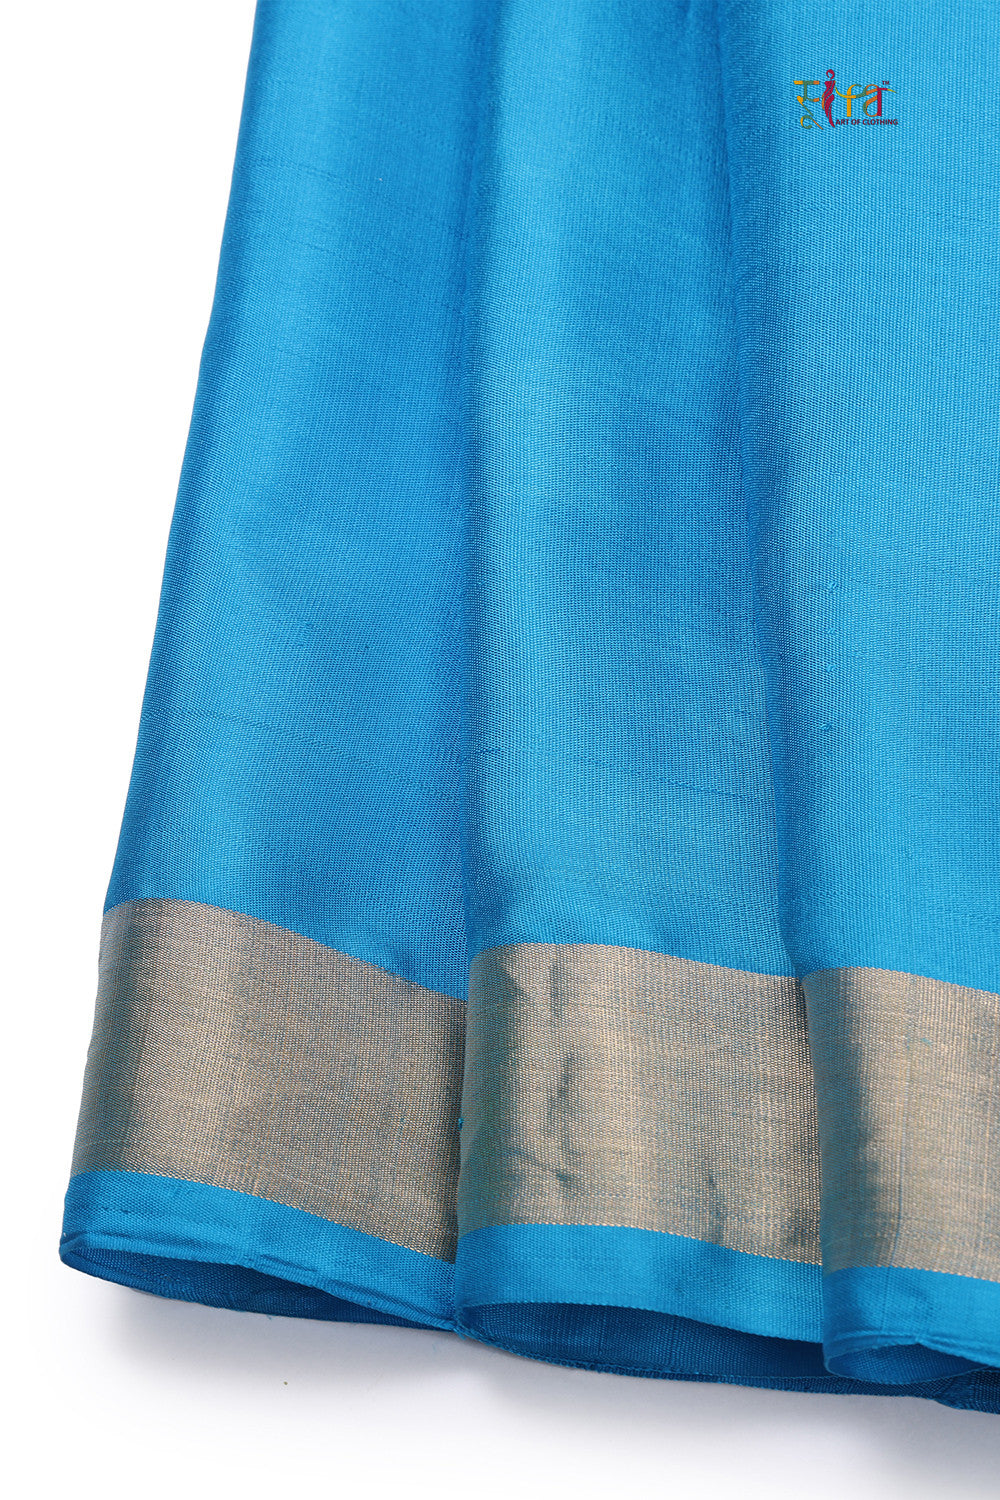 Handloom Green And Royal Blue Pure Mulberry. Silk Pochamaplly Saree With Zari Border